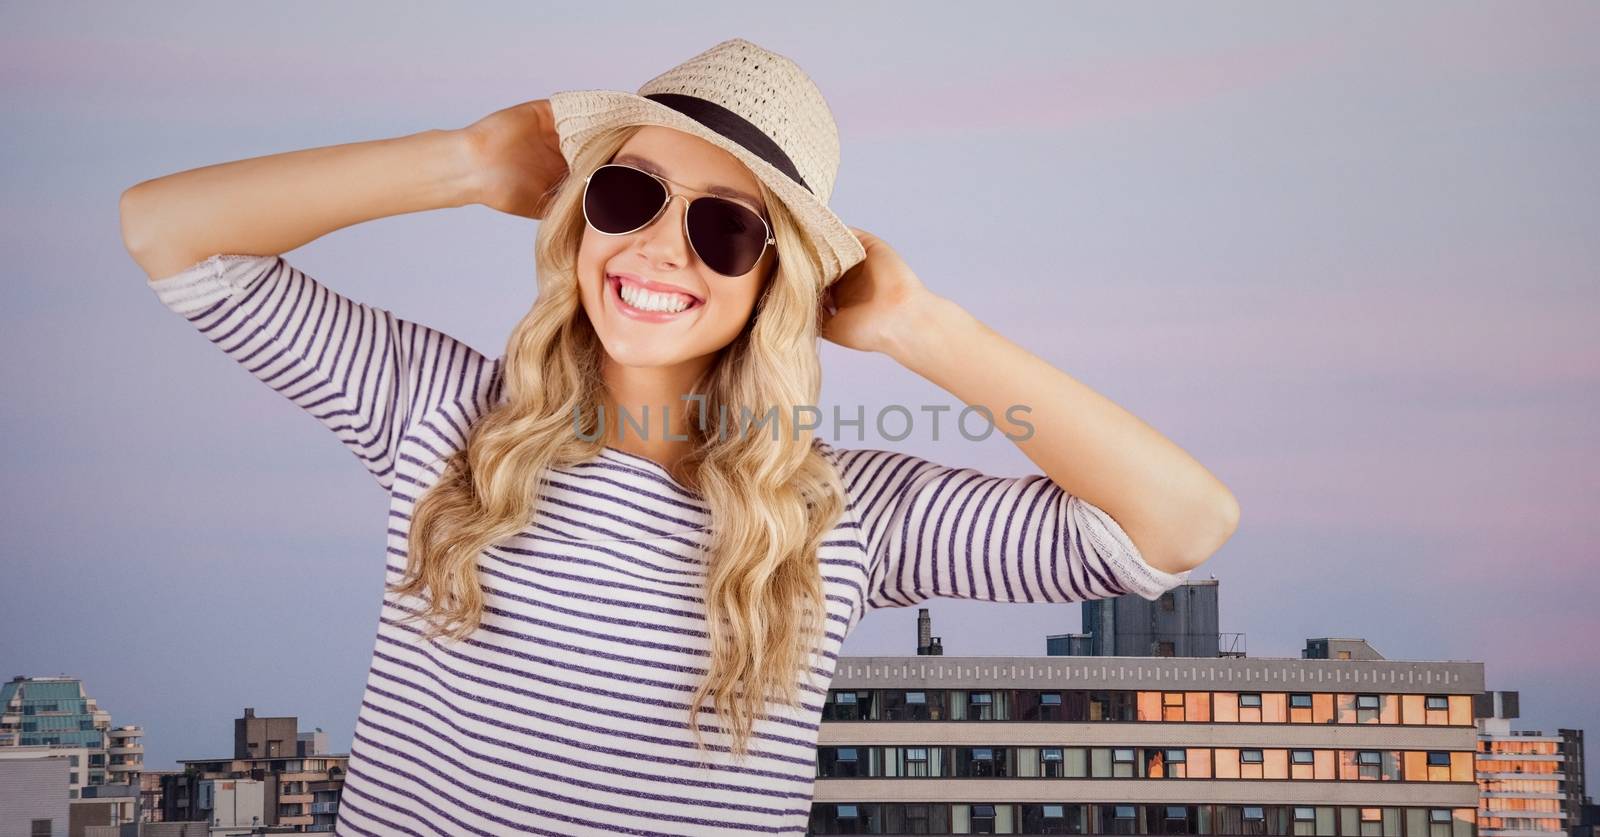 Digital composite of Woman in summer clothes with hands on head against buildings and evening sky